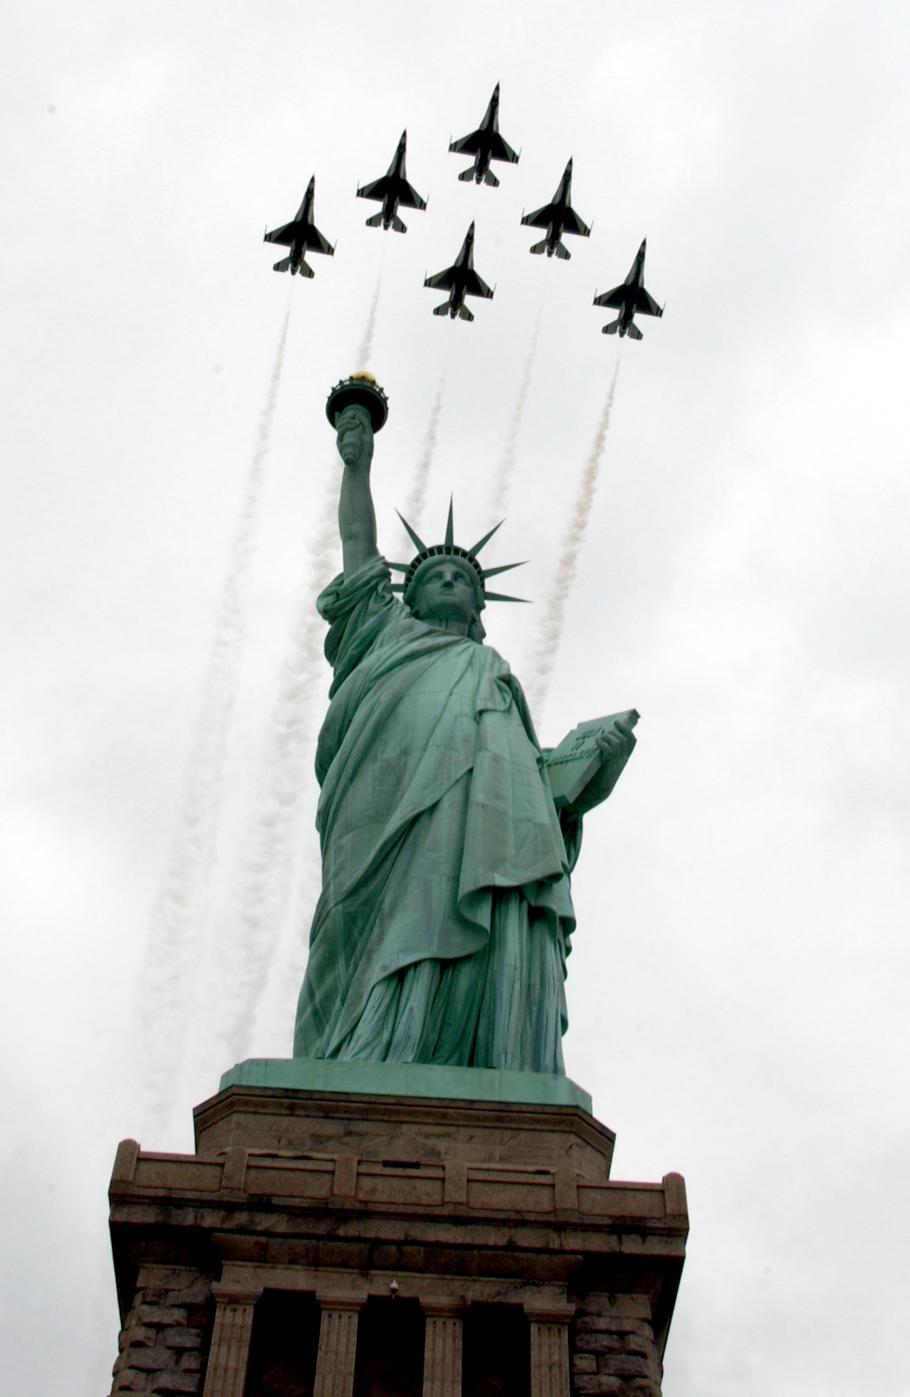 Thunderbirds Fly Over Statue of Liberty